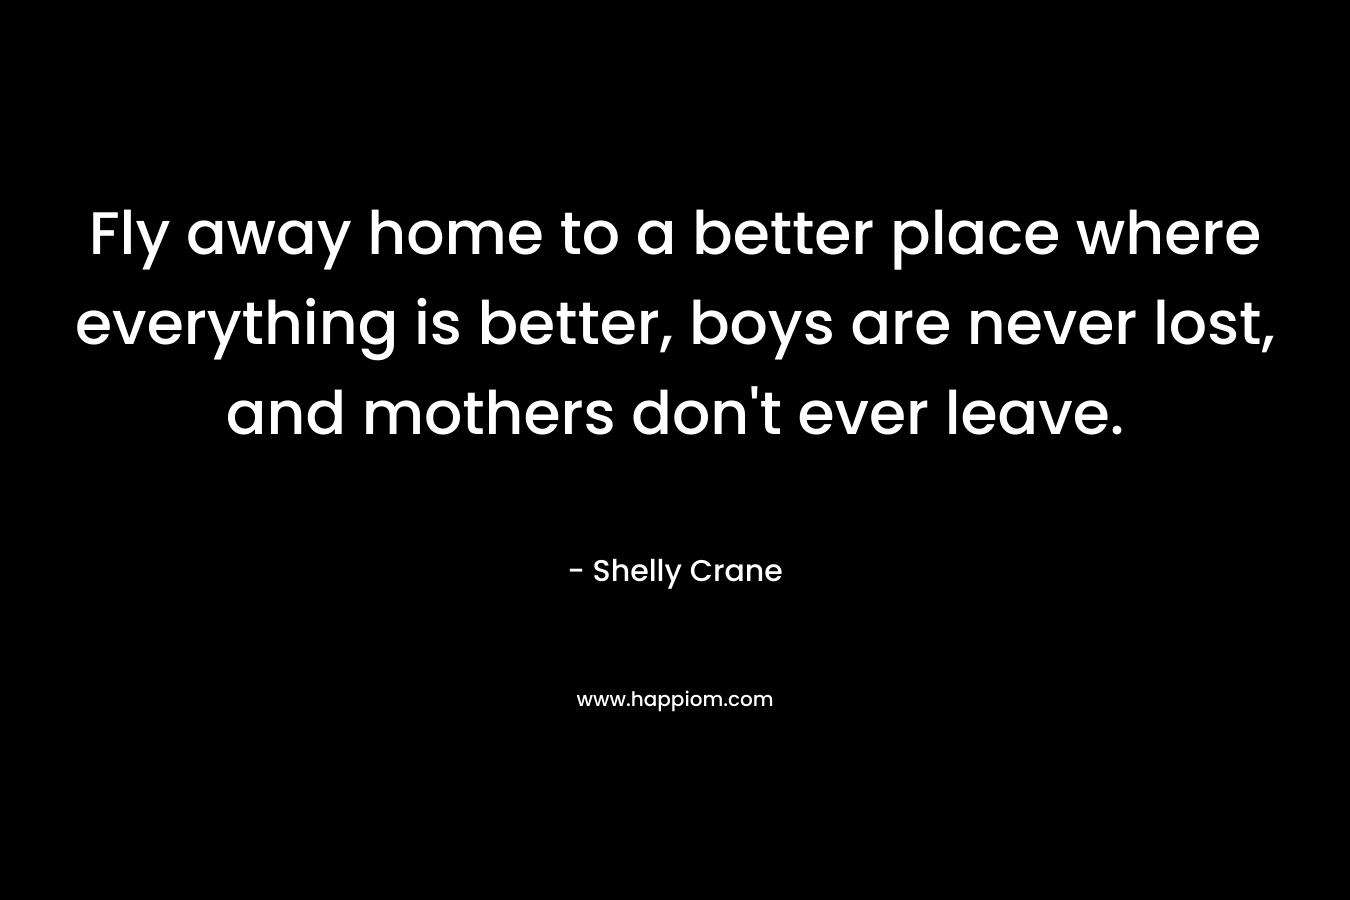 Fly away home to a better place where everything is better, boys are never lost, and mothers don’t ever leave. – Shelly Crane